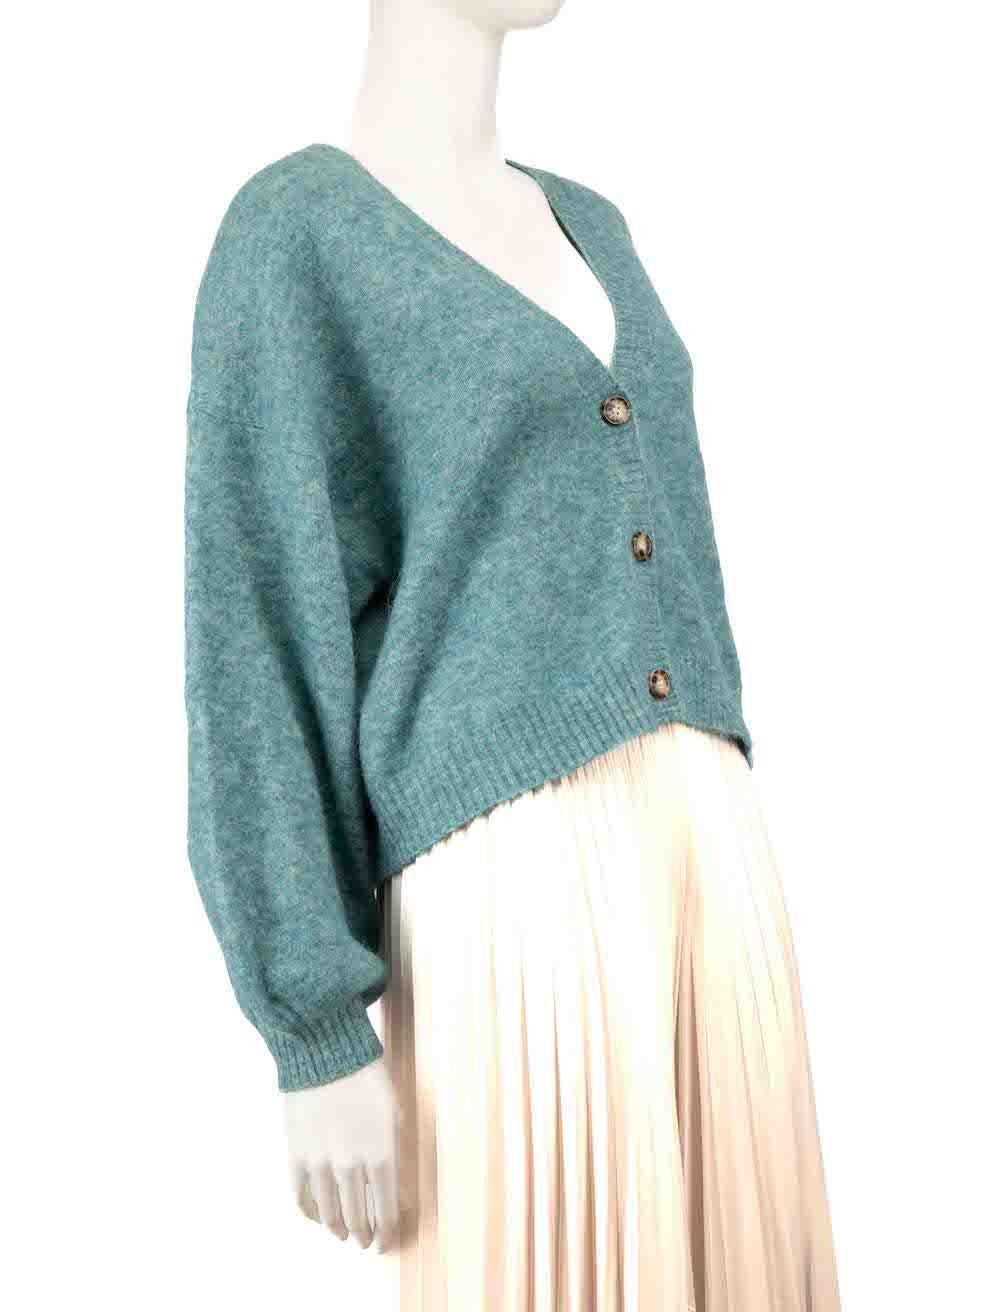 CONDITION is Never worn, with tags. No visible wear to cardigan is evident on this new Baum und Pferdgarten designer resale item.
 
 
 
 Details
 
 
 Turquoise
 
 Wool
 
 Cardigan
 
 Knitted and stretchy
 
 Front button up closure
 
 Cropped length
